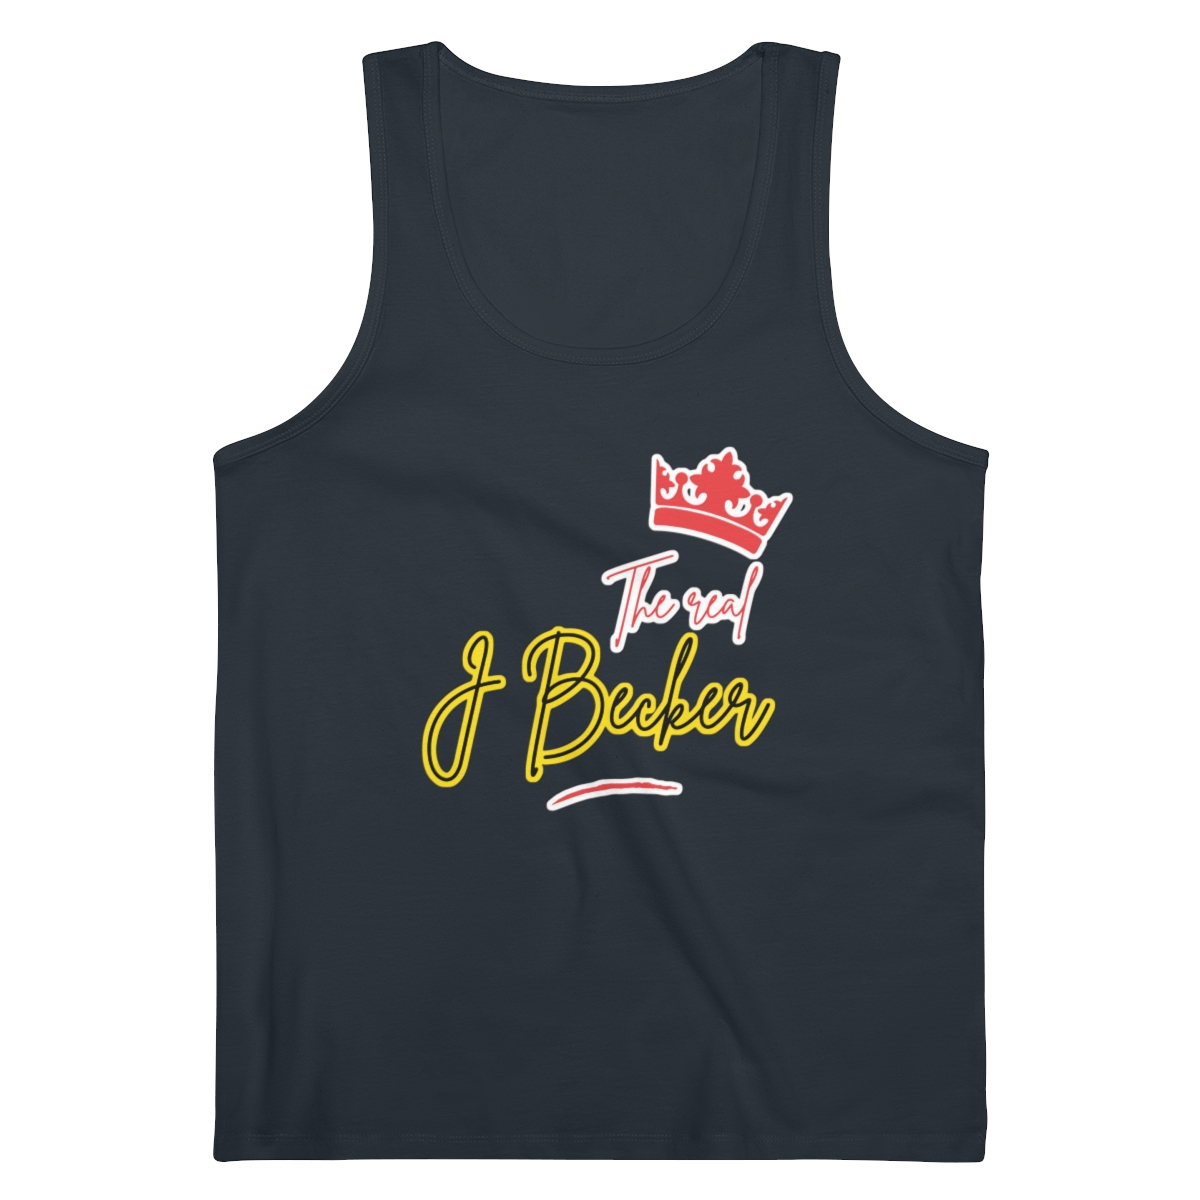 The Offical @THEREALJBECKER Men's Specter Tank Top